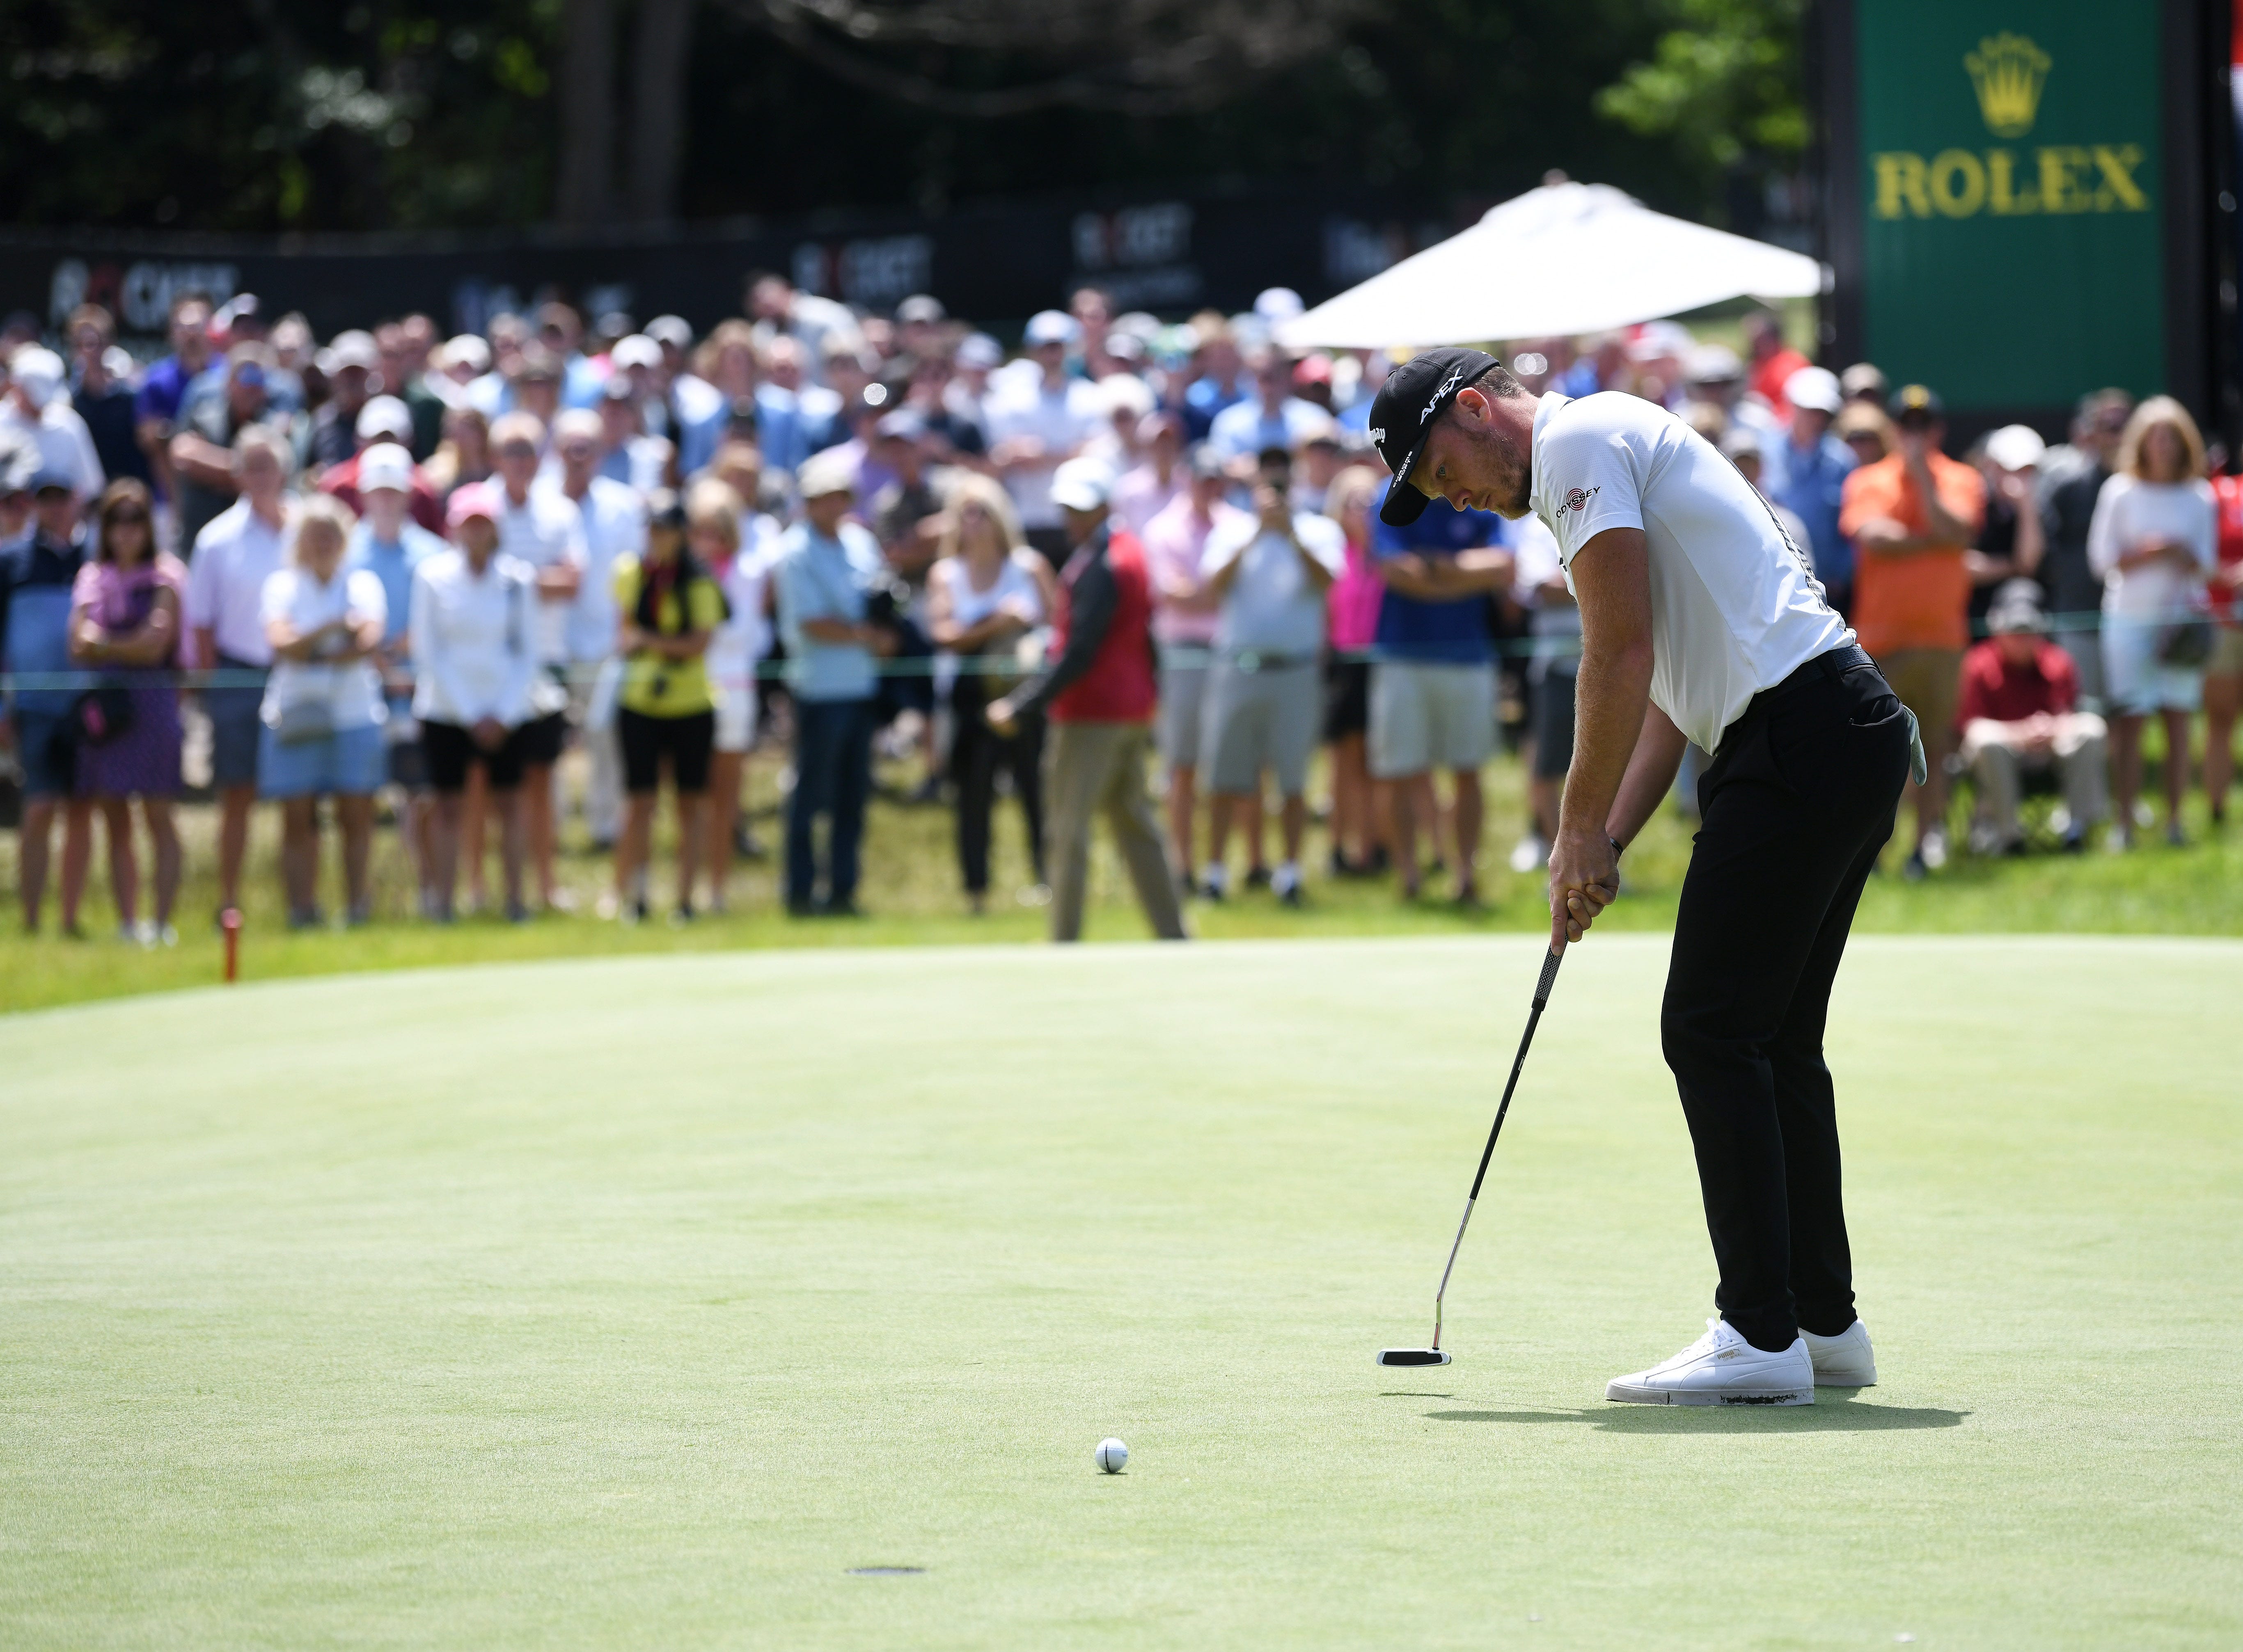 Danny Willett putts on the 18th green.